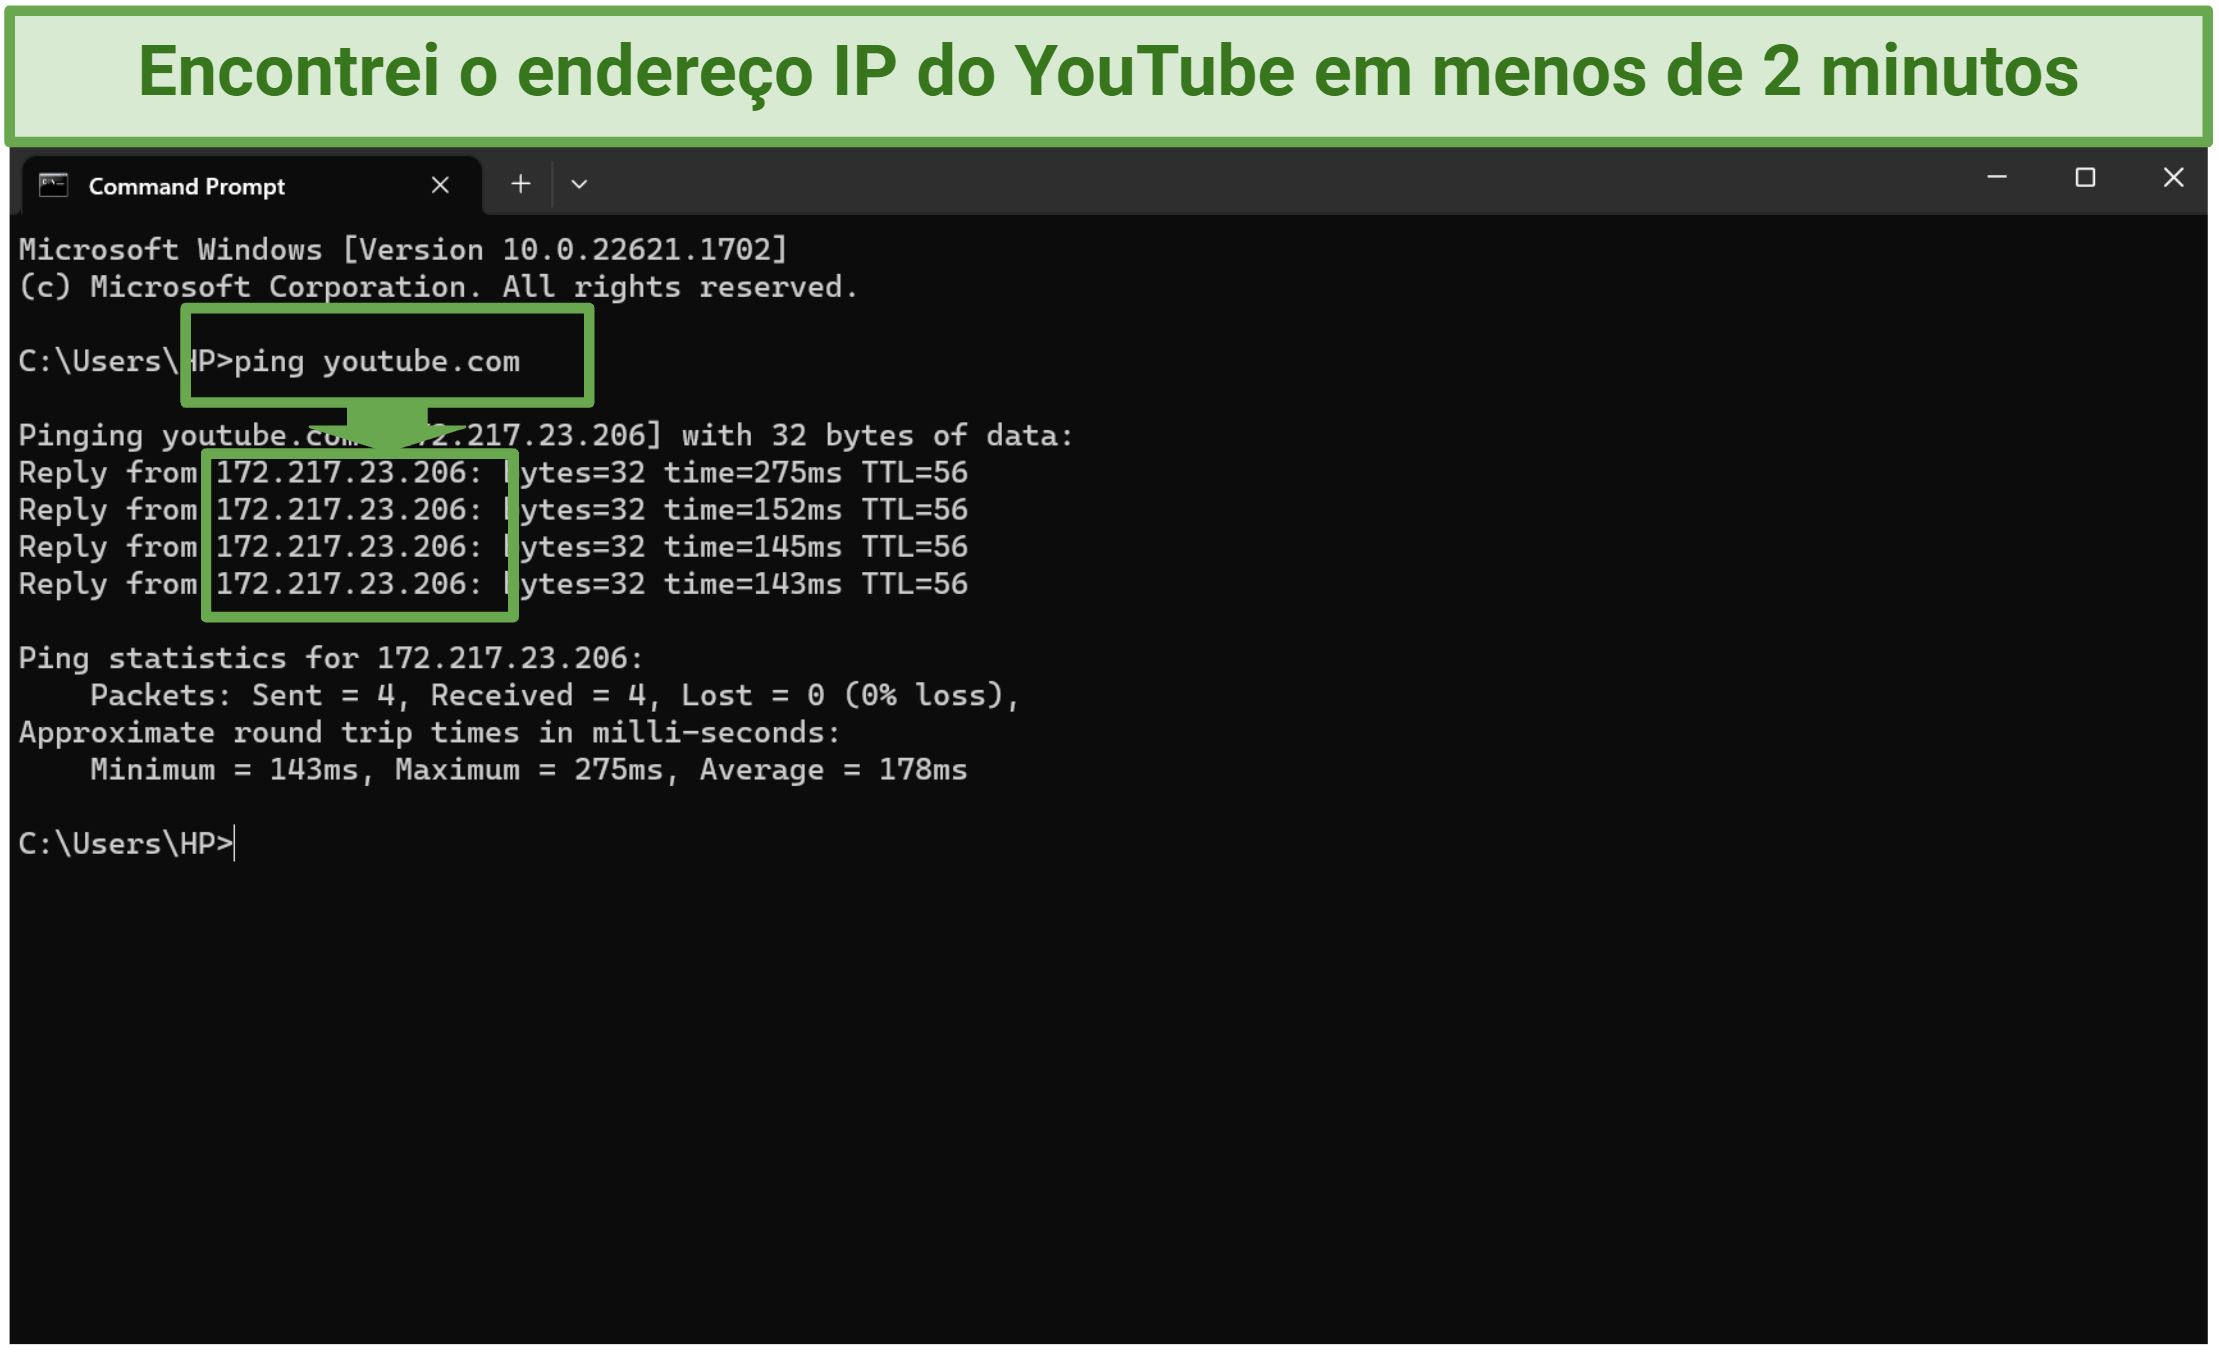 A screenshot showing how to find a website's IP address using the Windows Command Prompt program